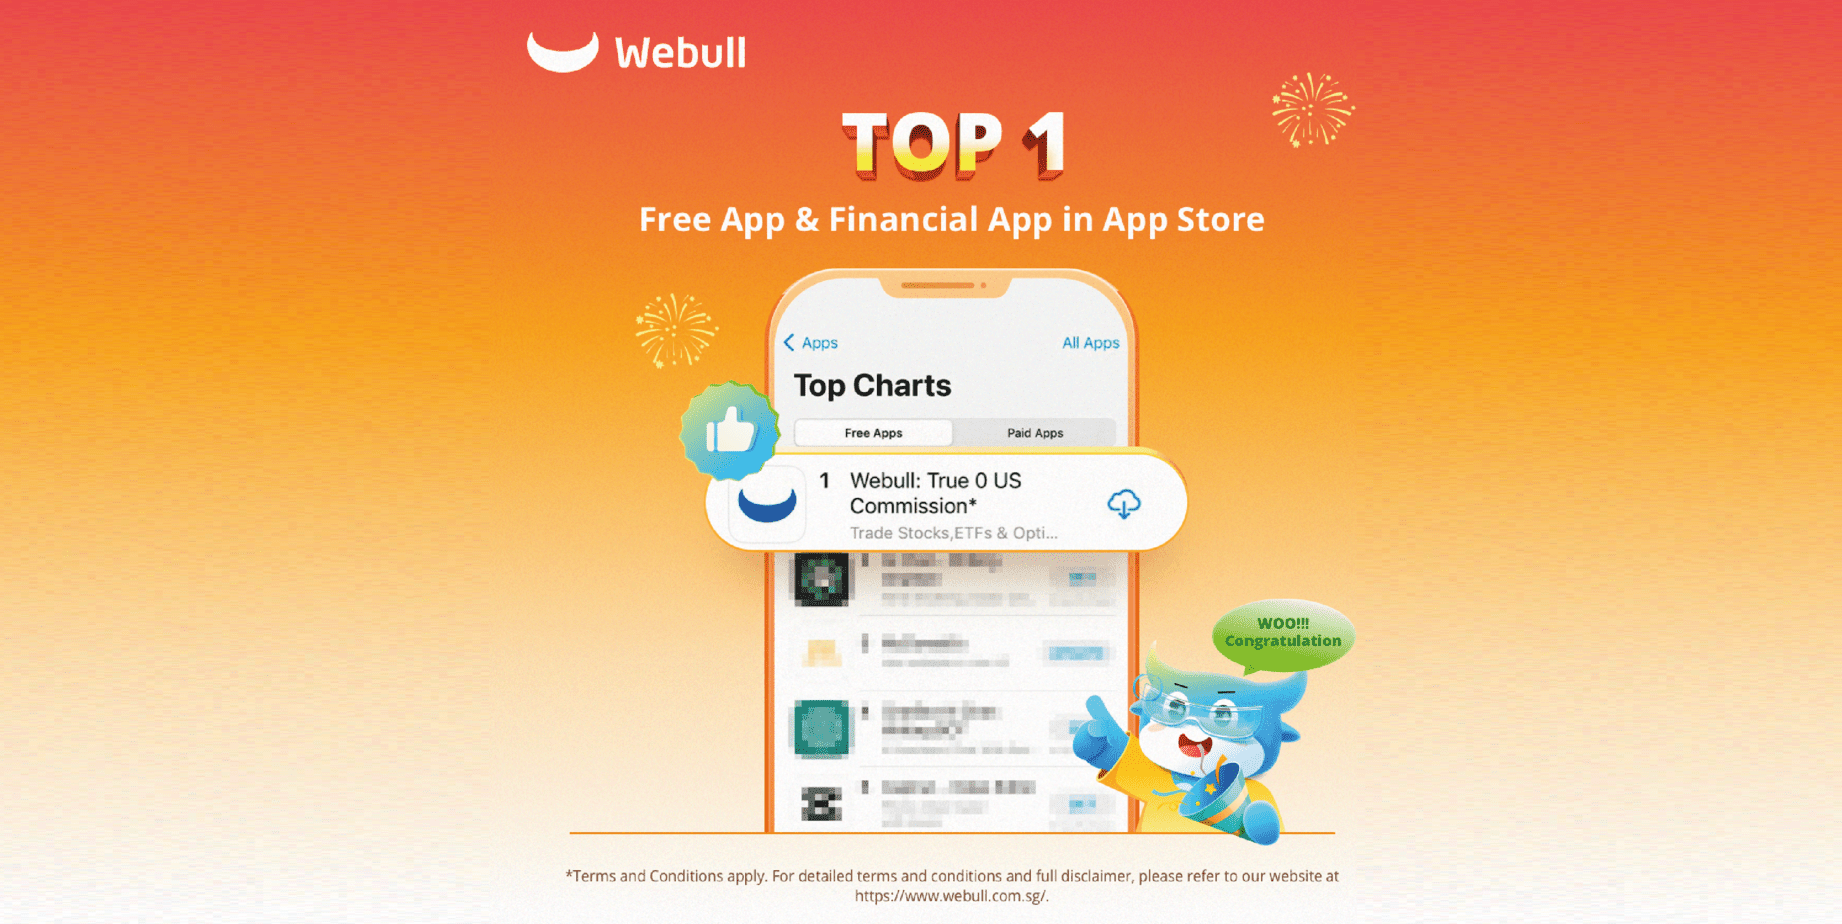 Webull – Setup Your Webull Account By Following These Steps. (There are bonus rewards you can get as long as you meet the requirements)